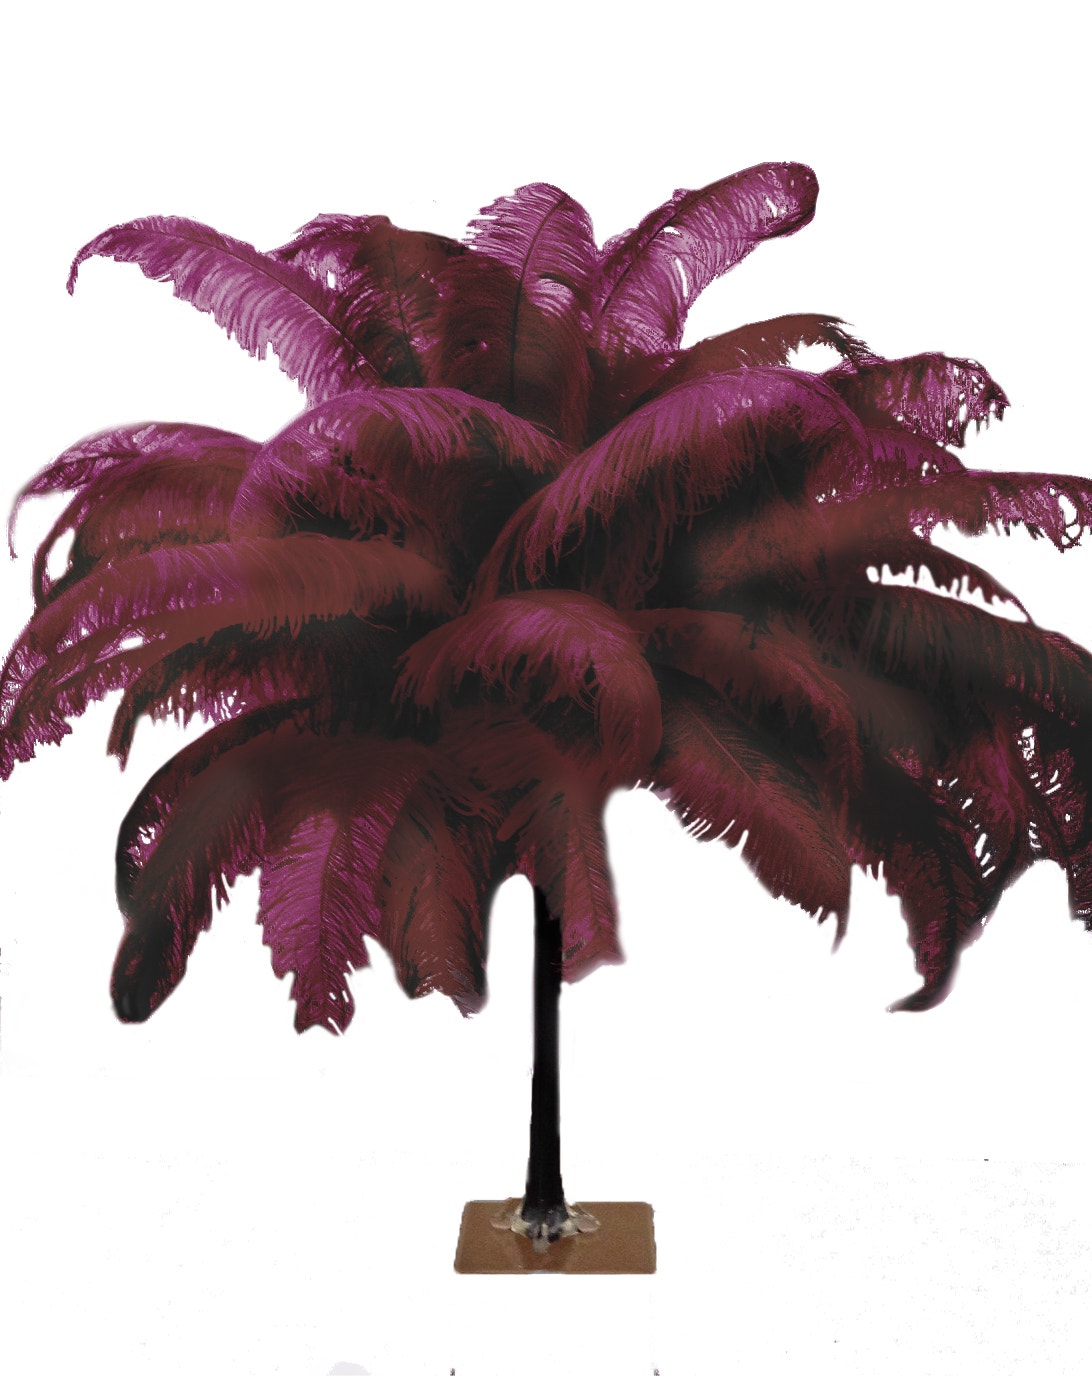 Large Ostrich Feathers - 18-24" Spads - Burgundy